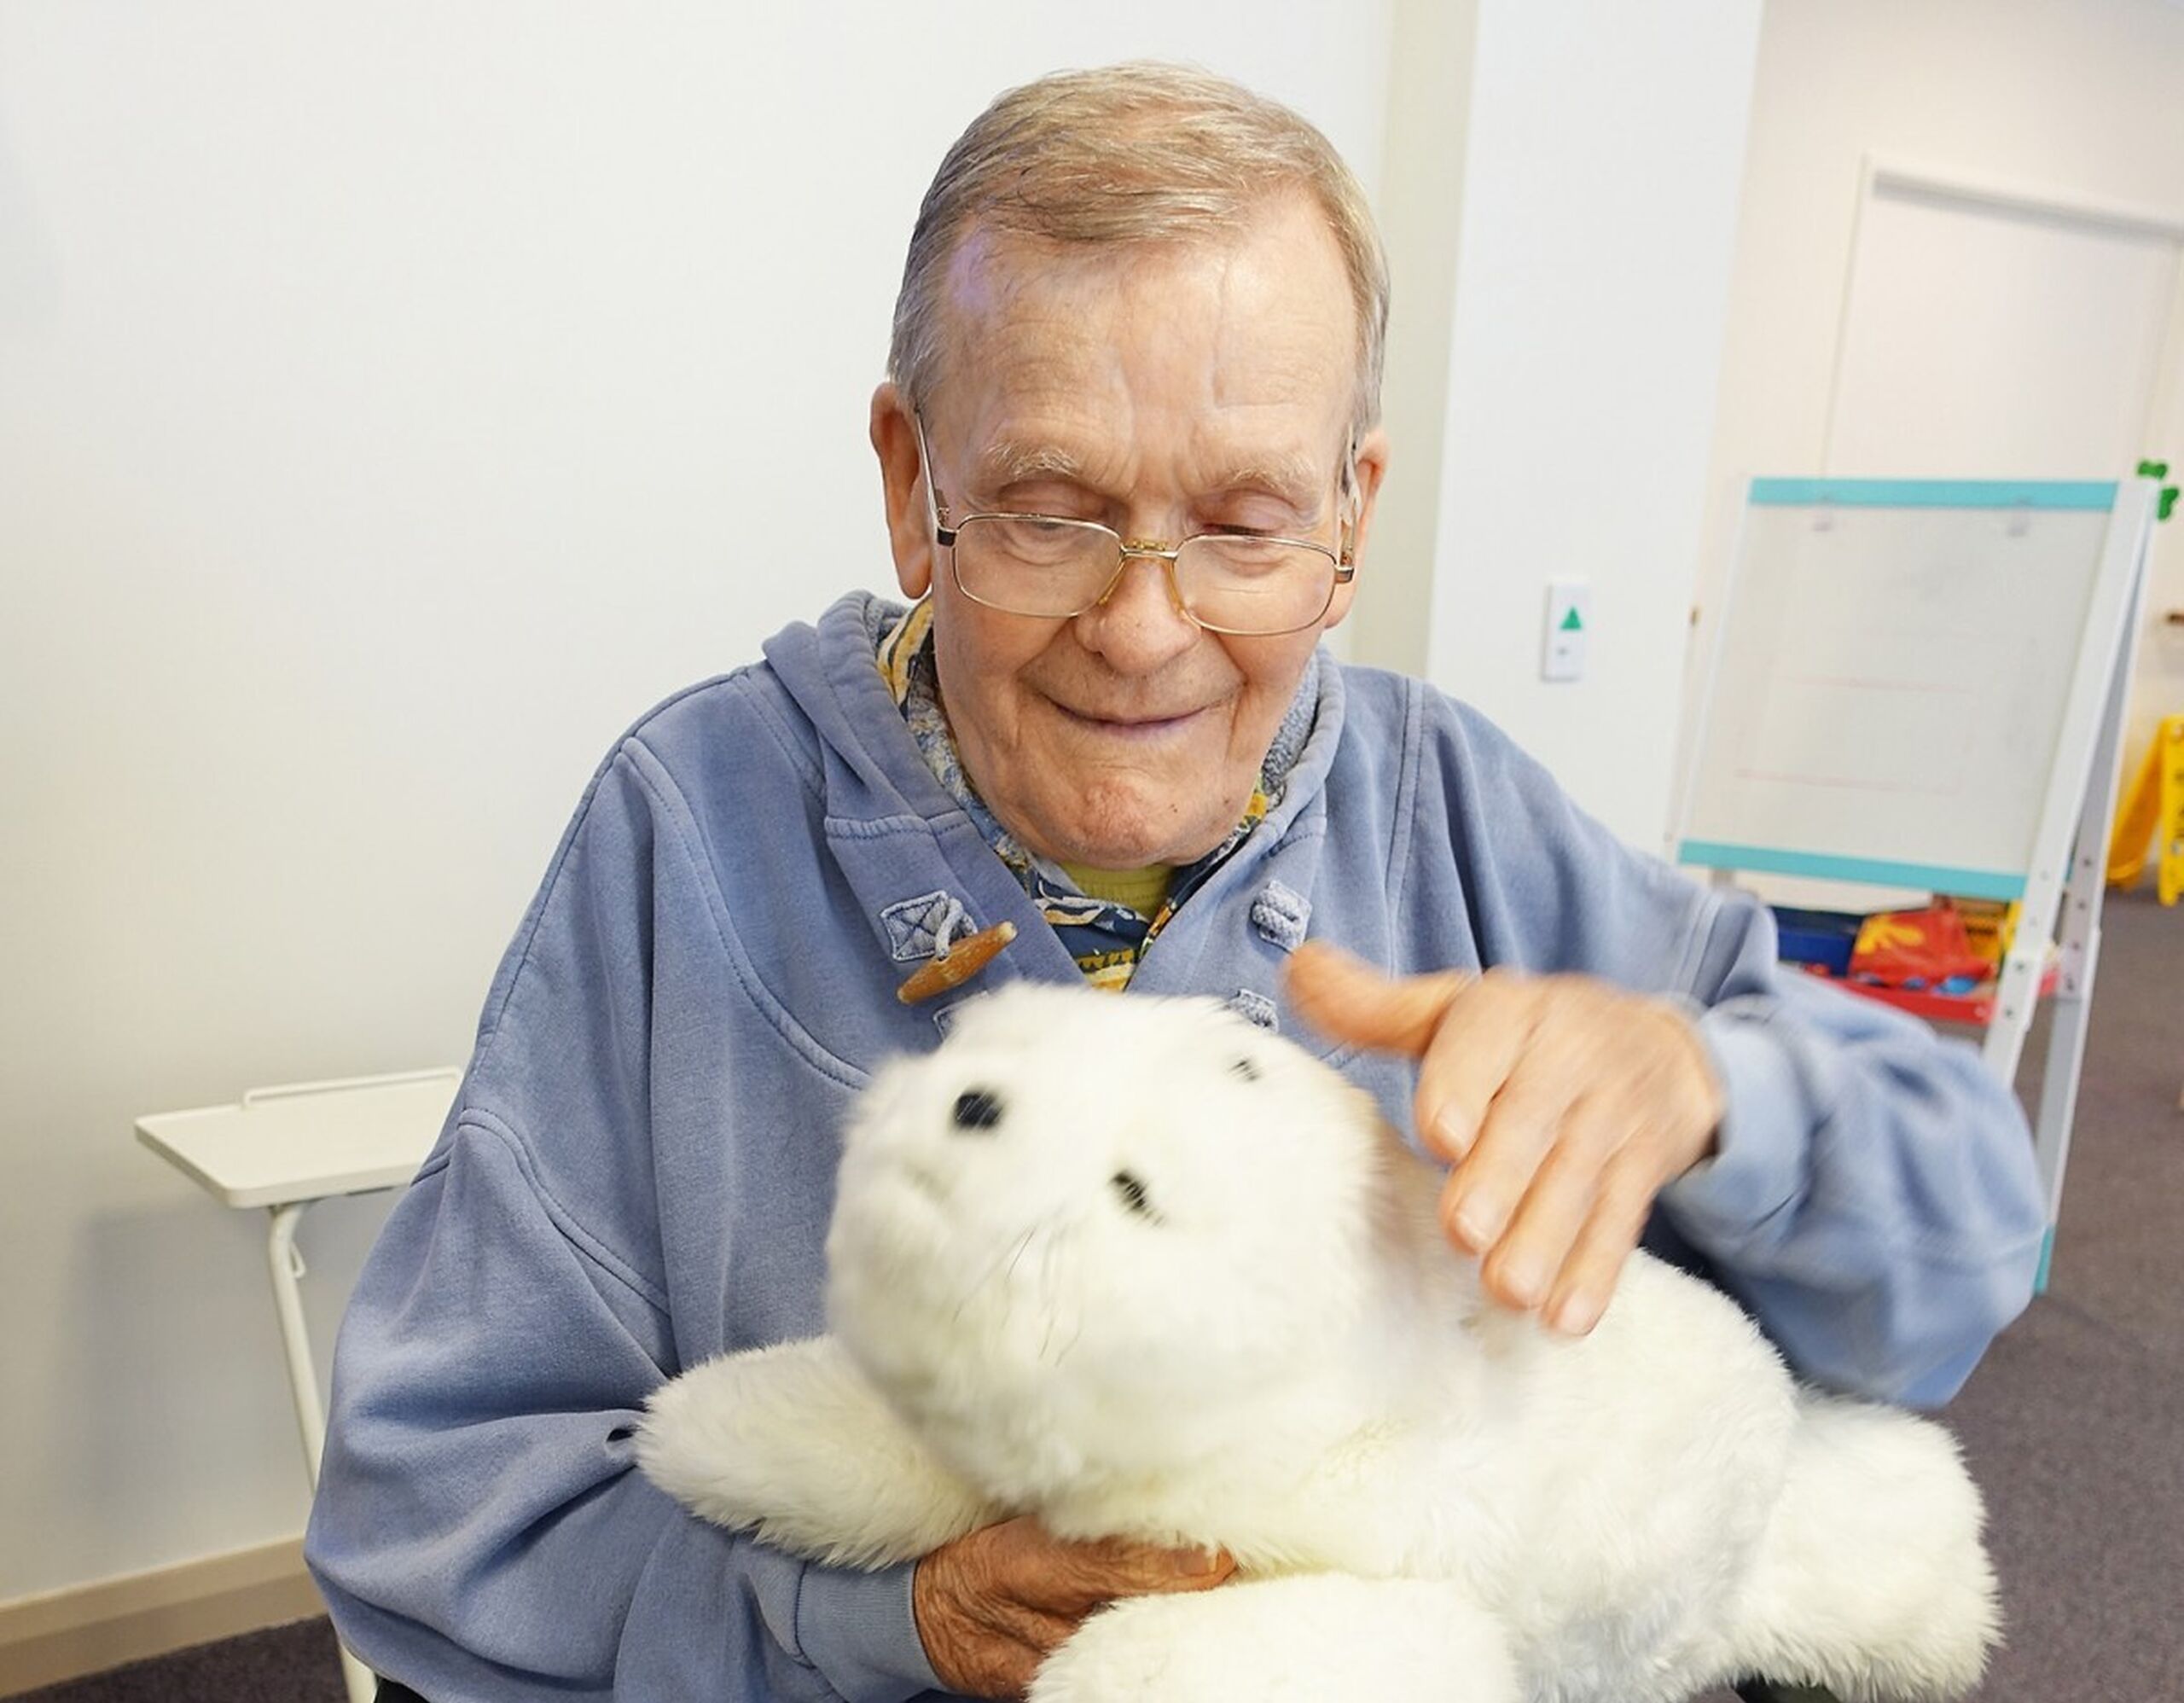 Robotic therapy seal provides comfort to people living with dementia